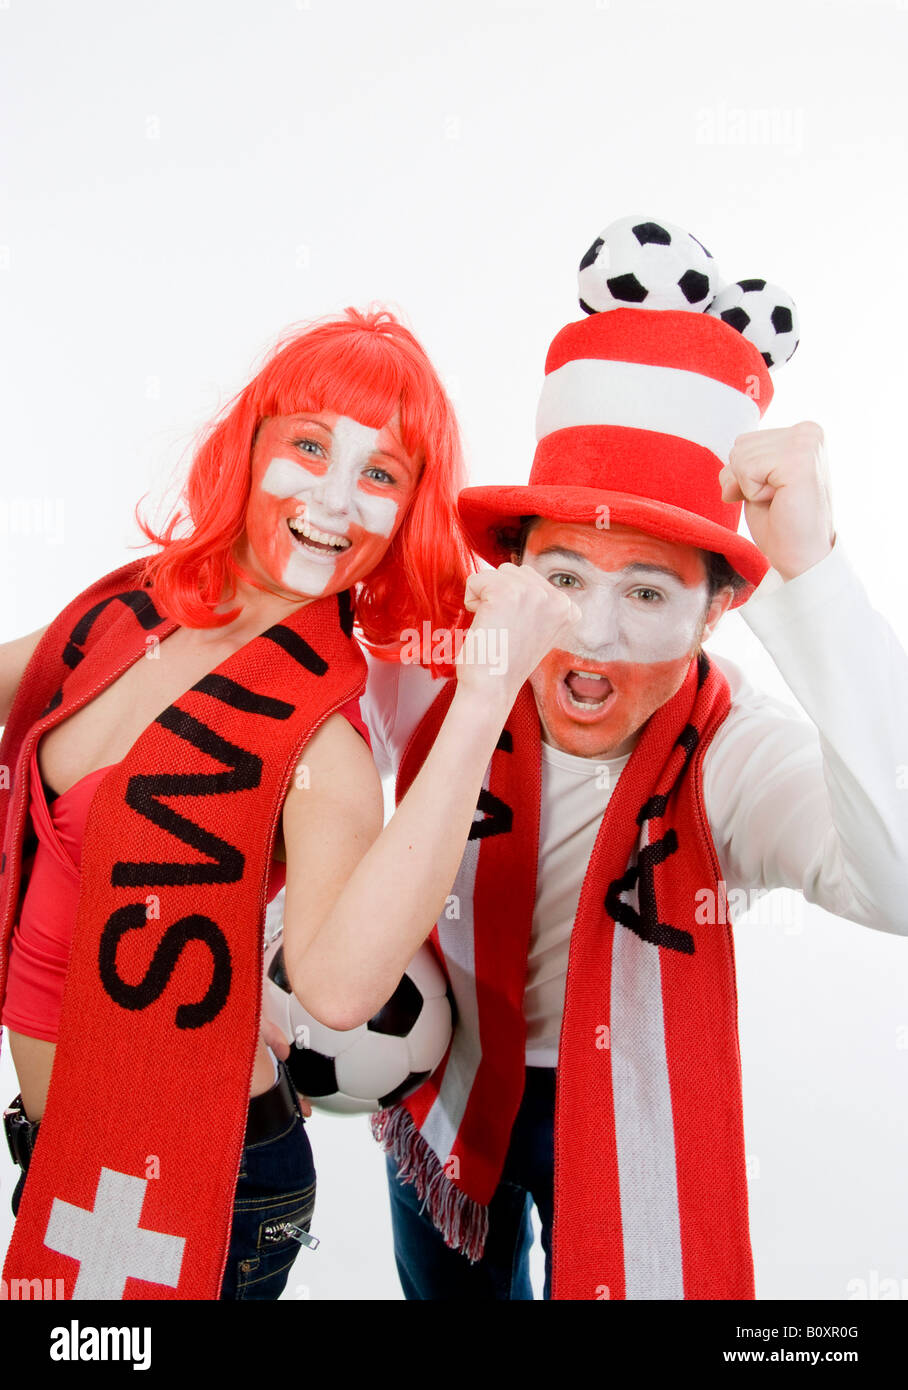 Austrian and Swiss soccer fans, EURO 2008. A man and a woman cheering with clenched fists Stock Photo